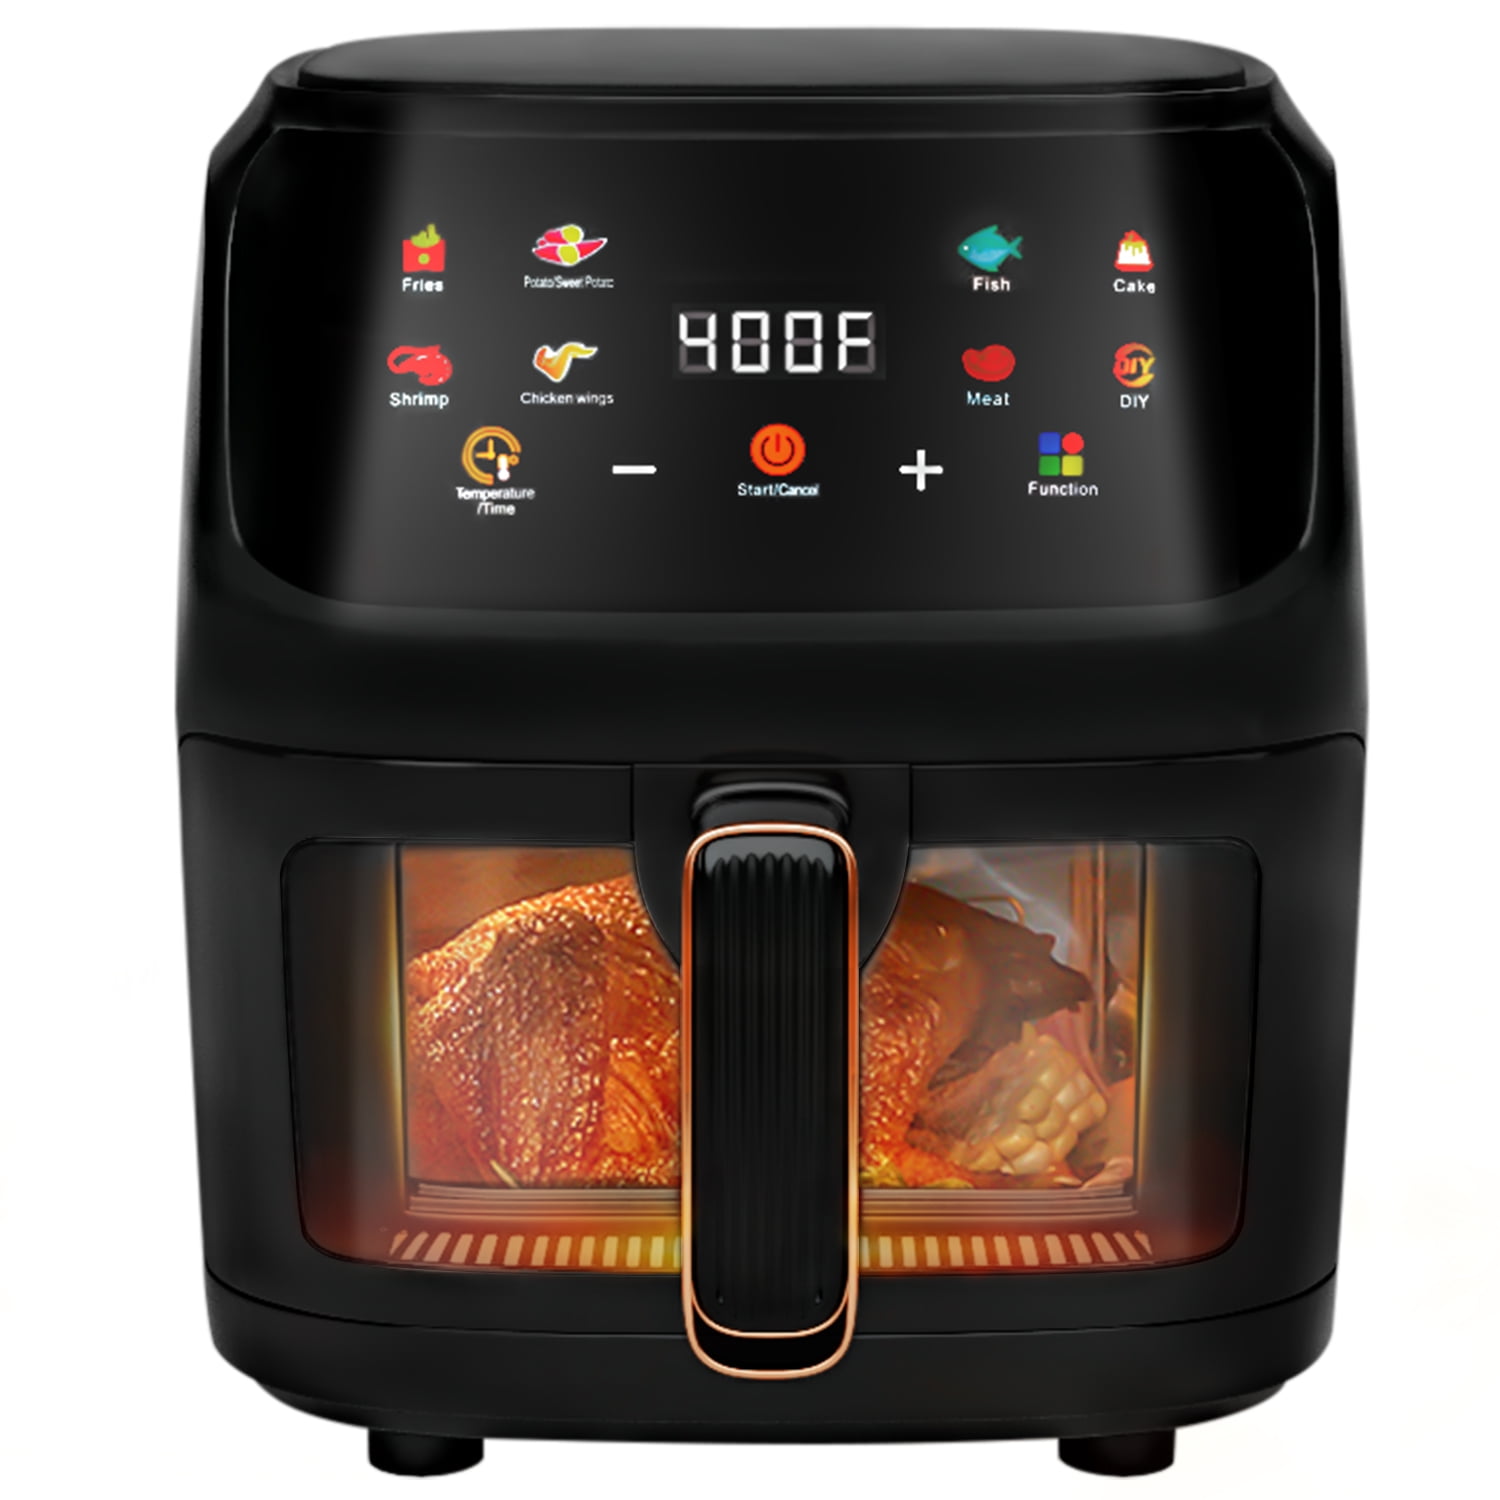 Philips launches its first air fryer with a see-through cooking window